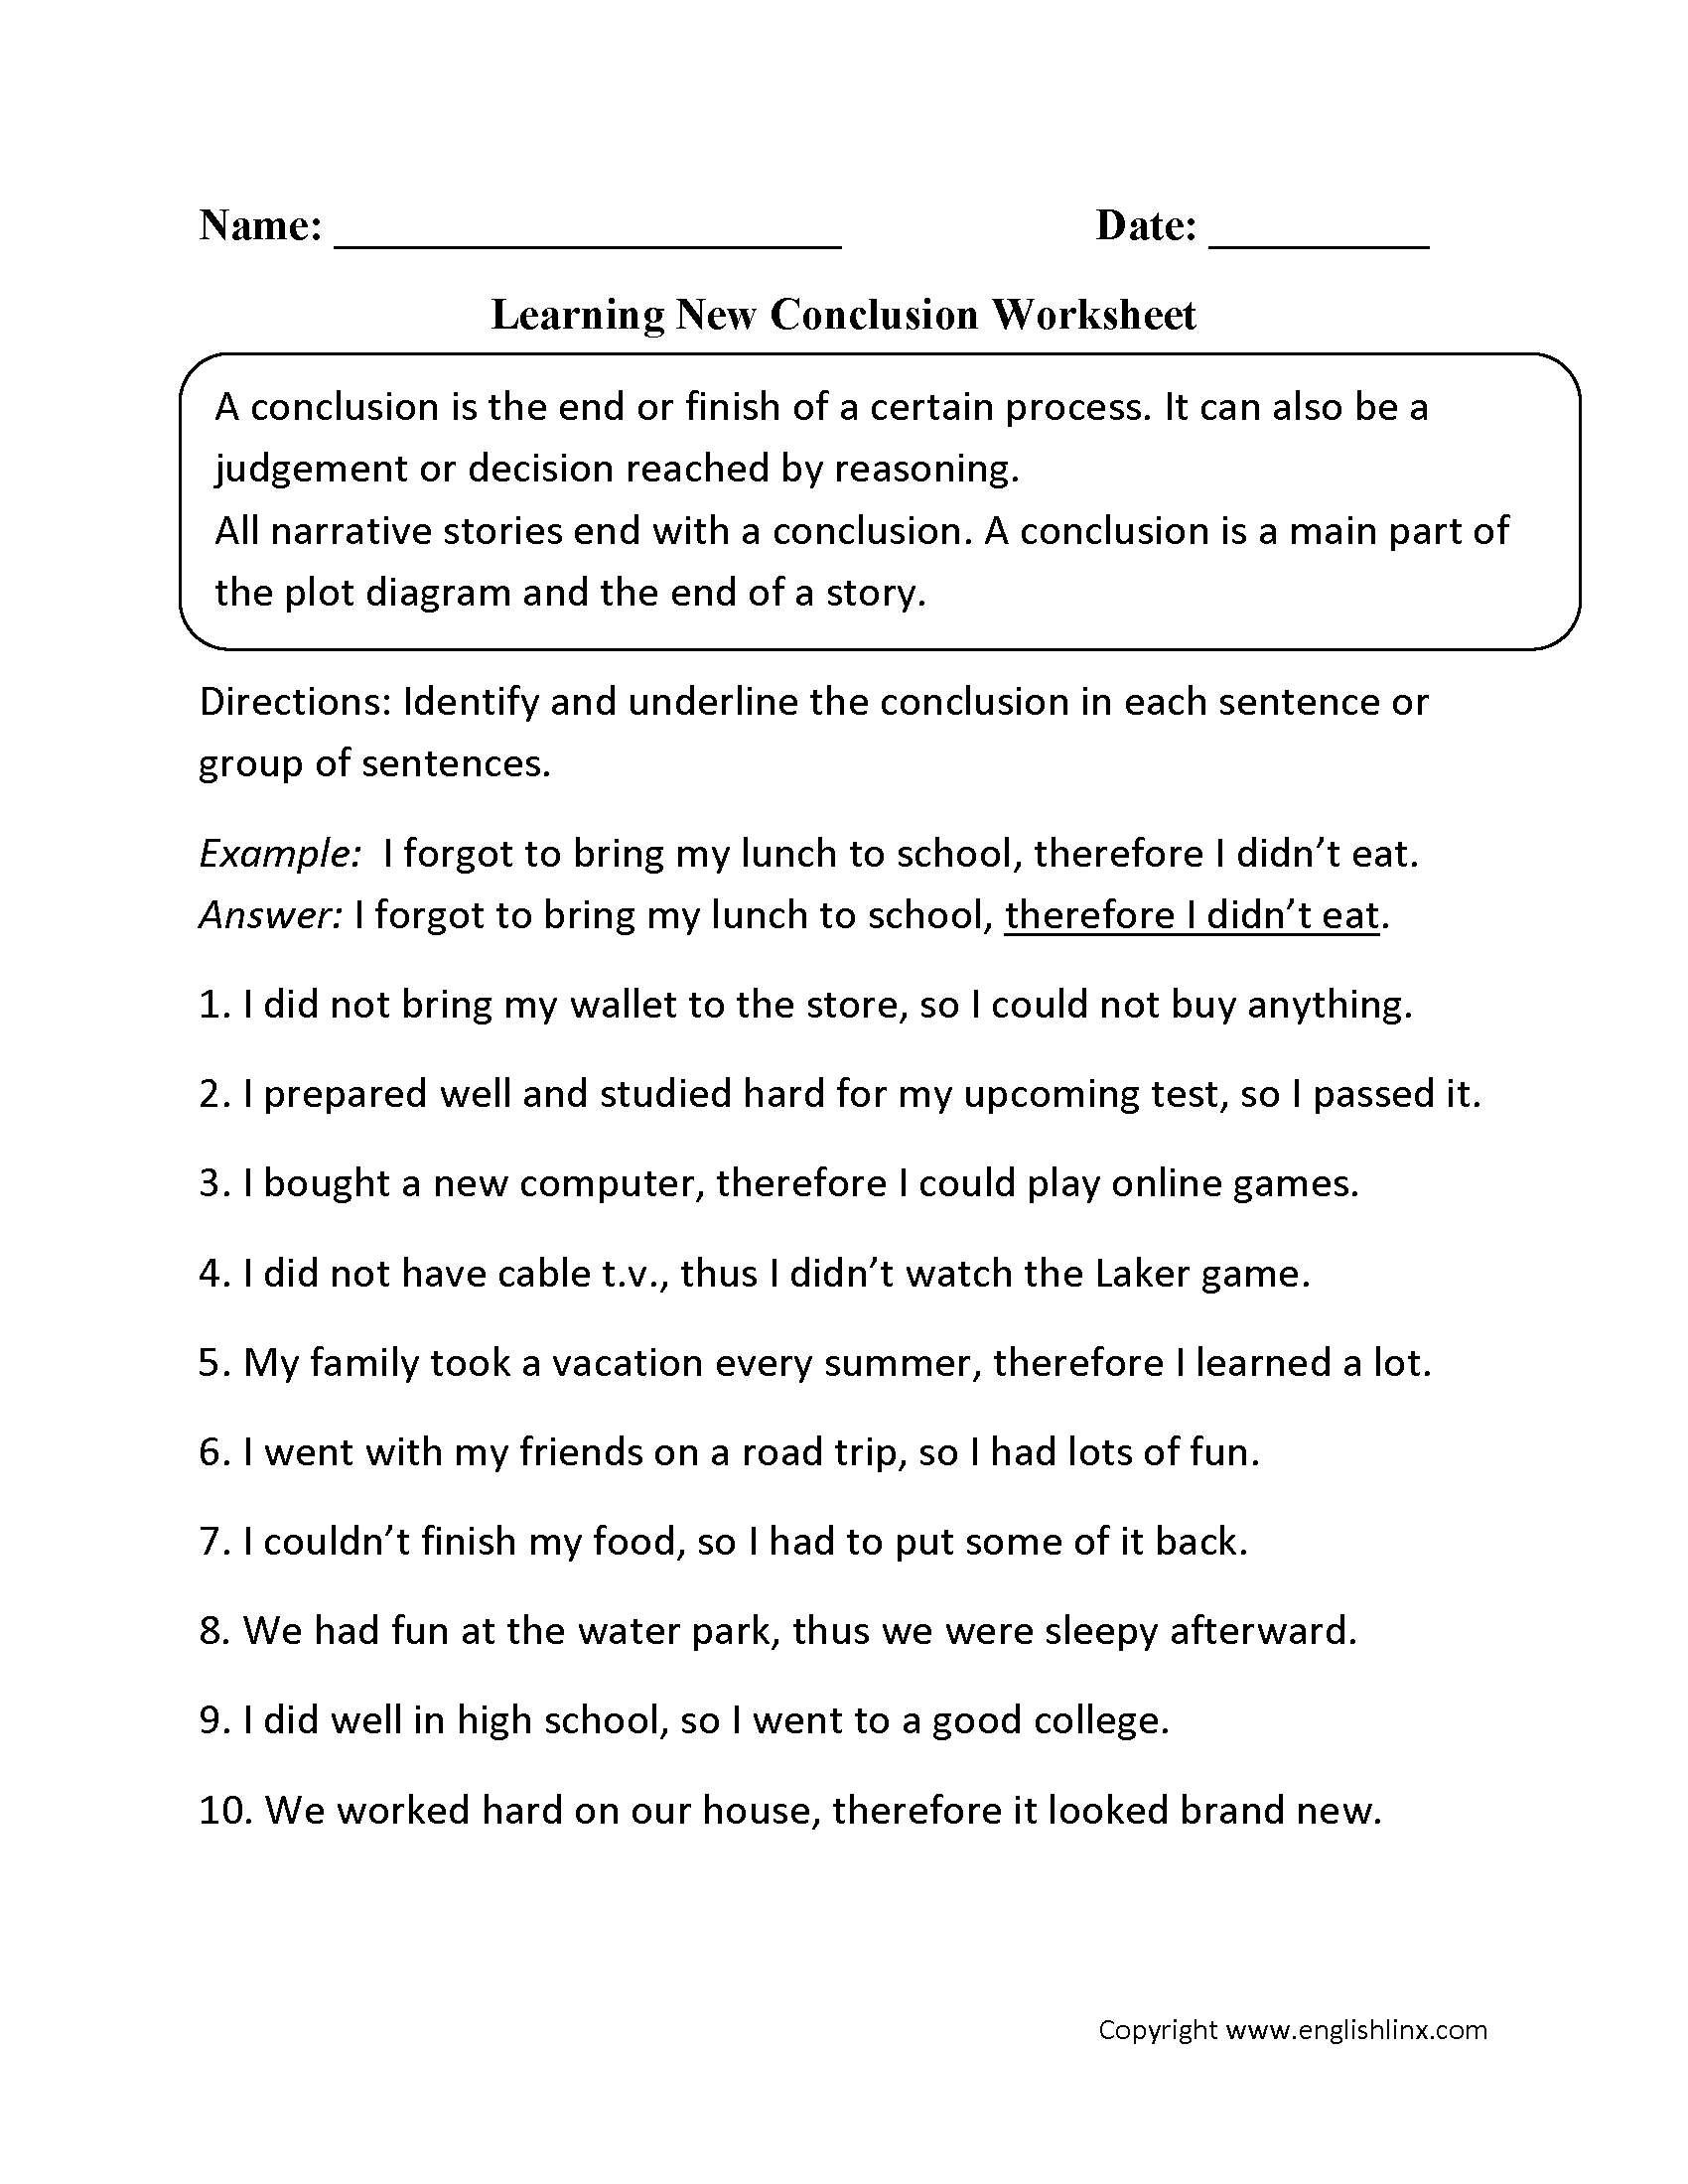 Learning New Conclusion Worksheet